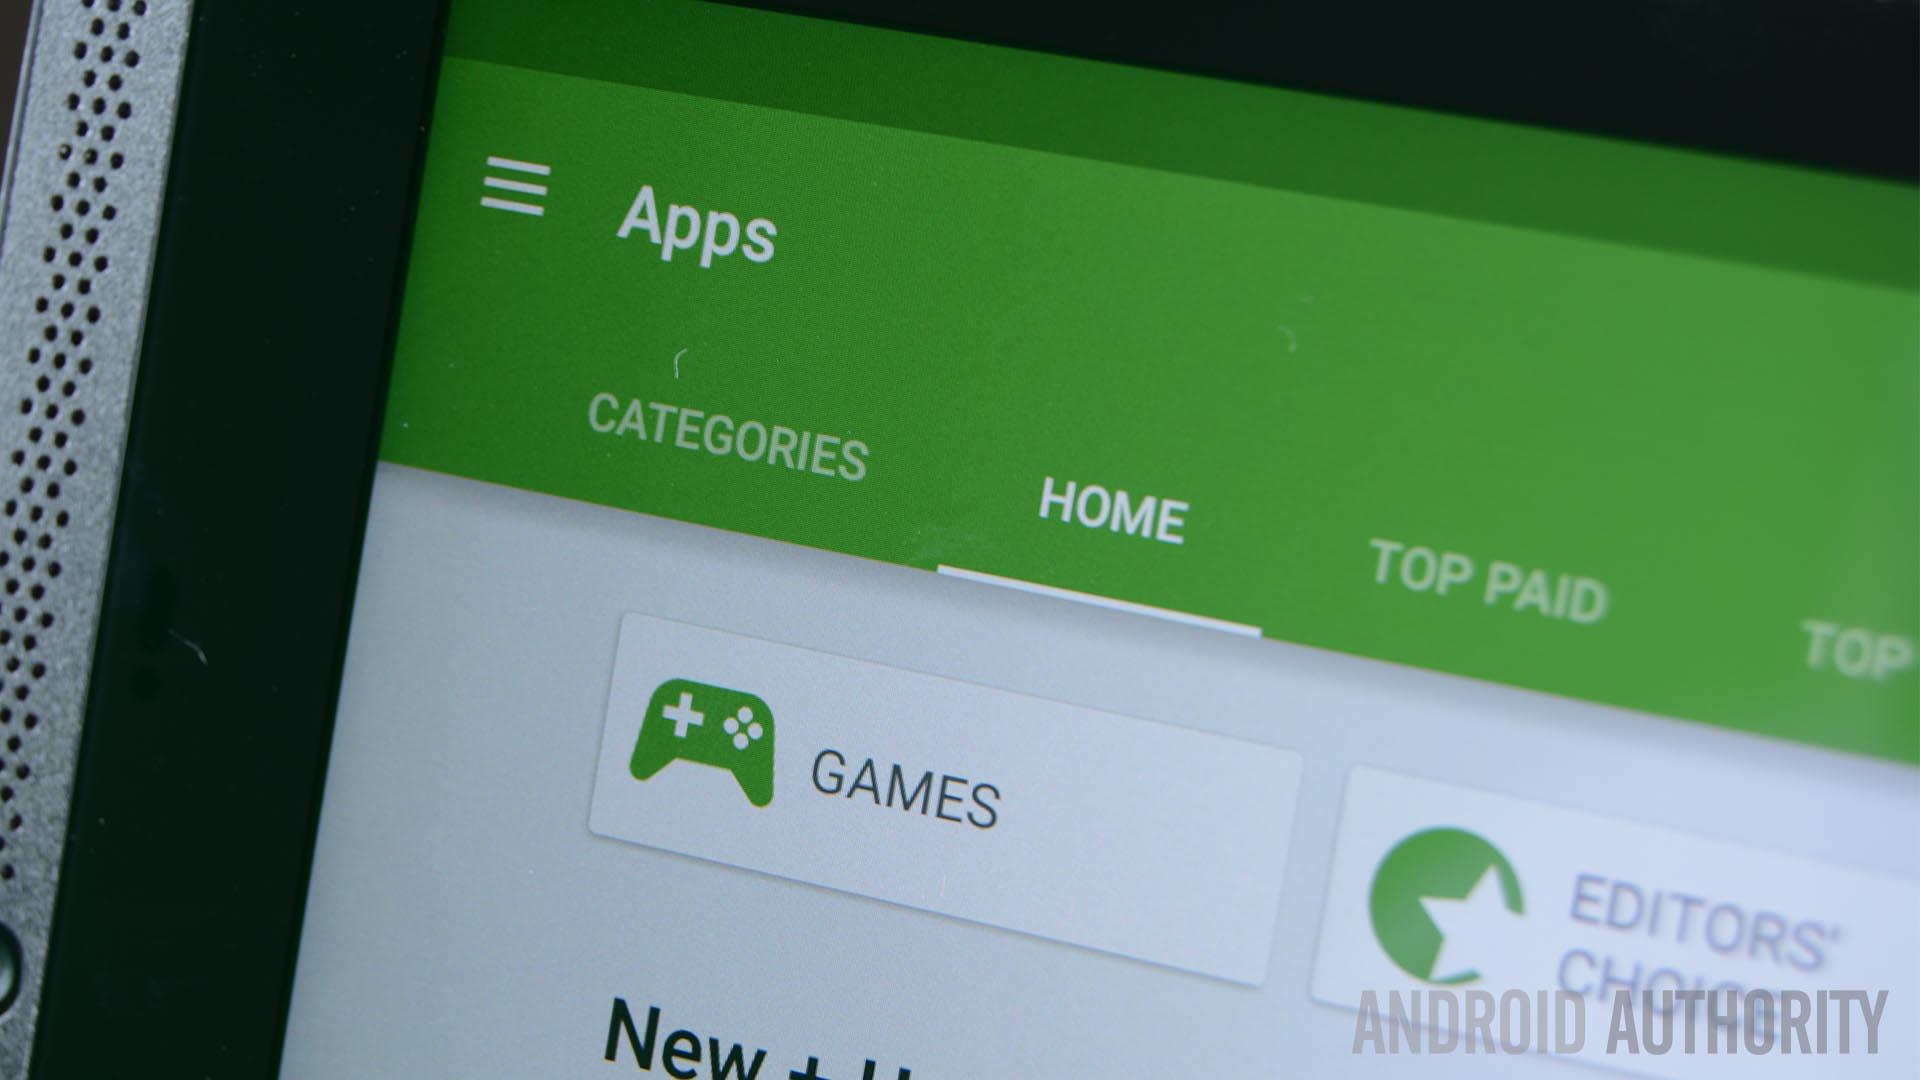 Android Apps by MADFINGER Games on Google Play